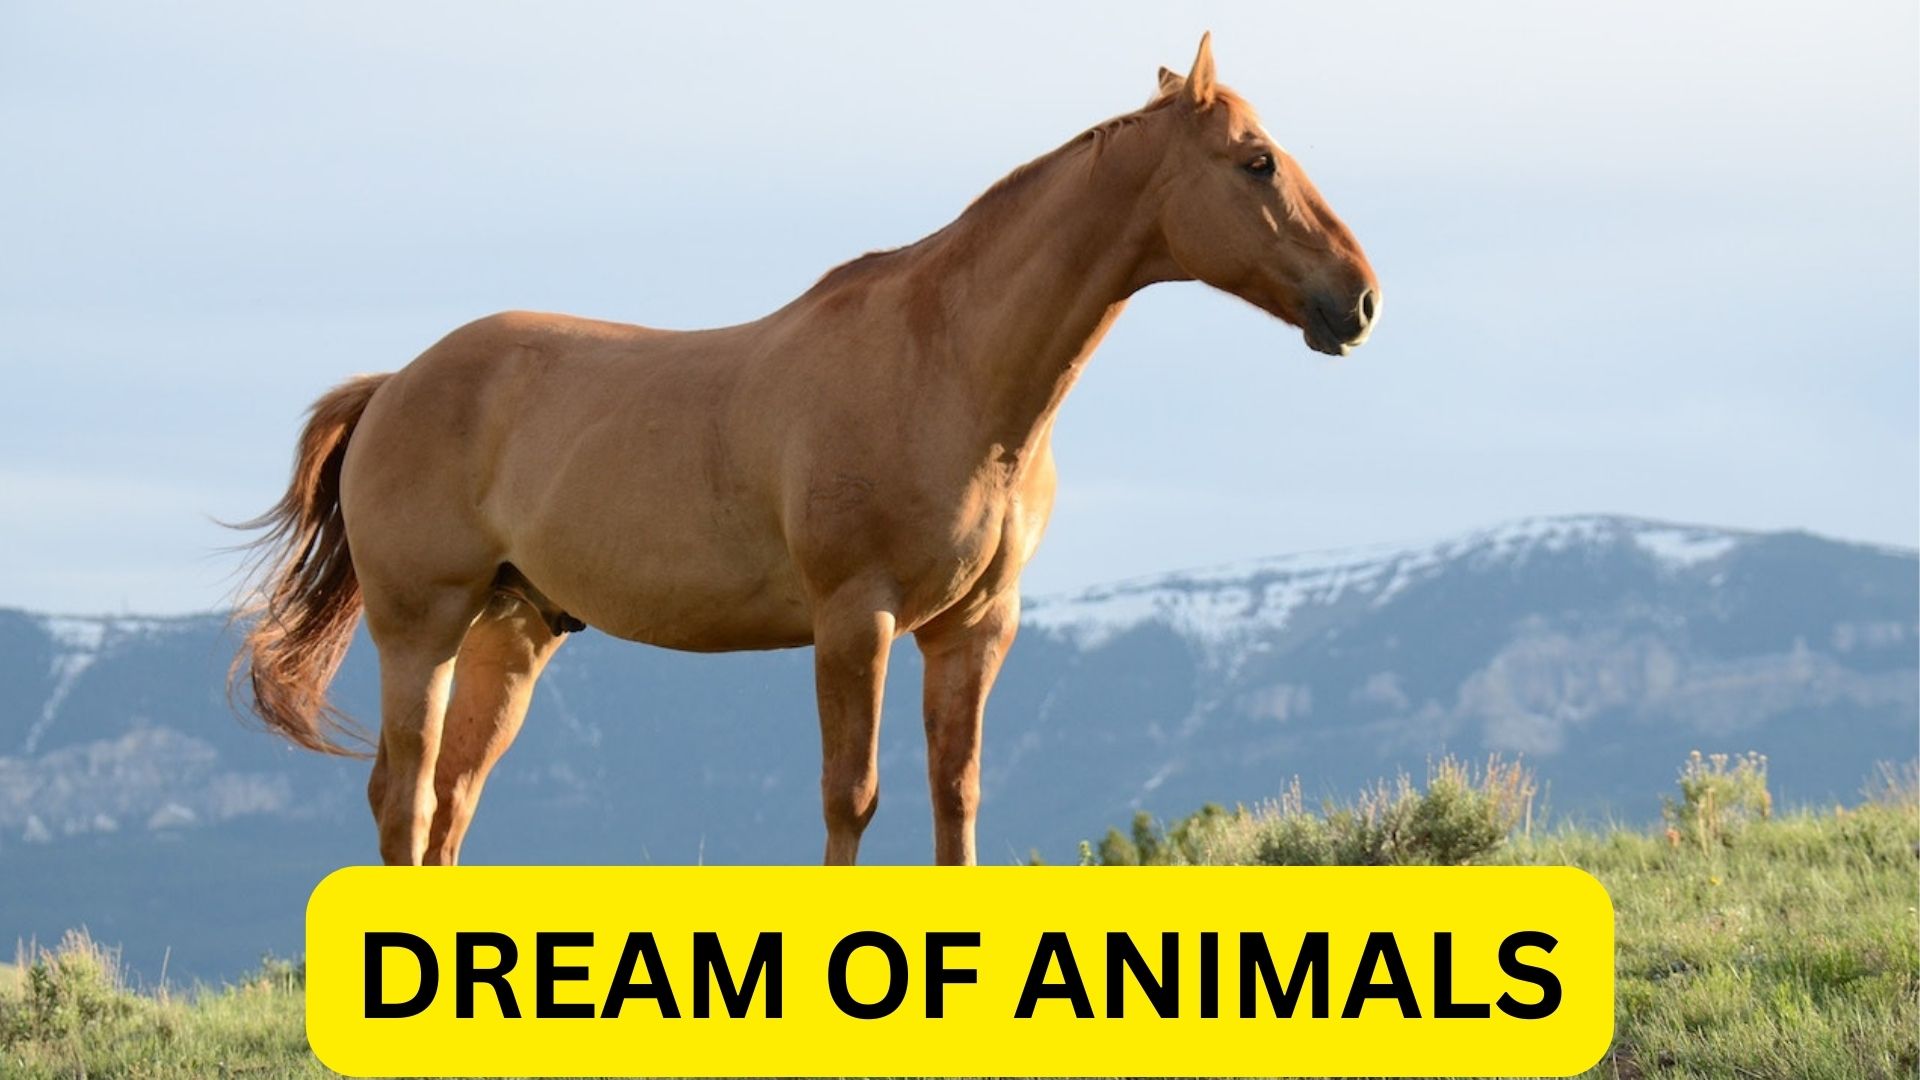 Dream Of Animals - It Signifies Our Basic Instincts